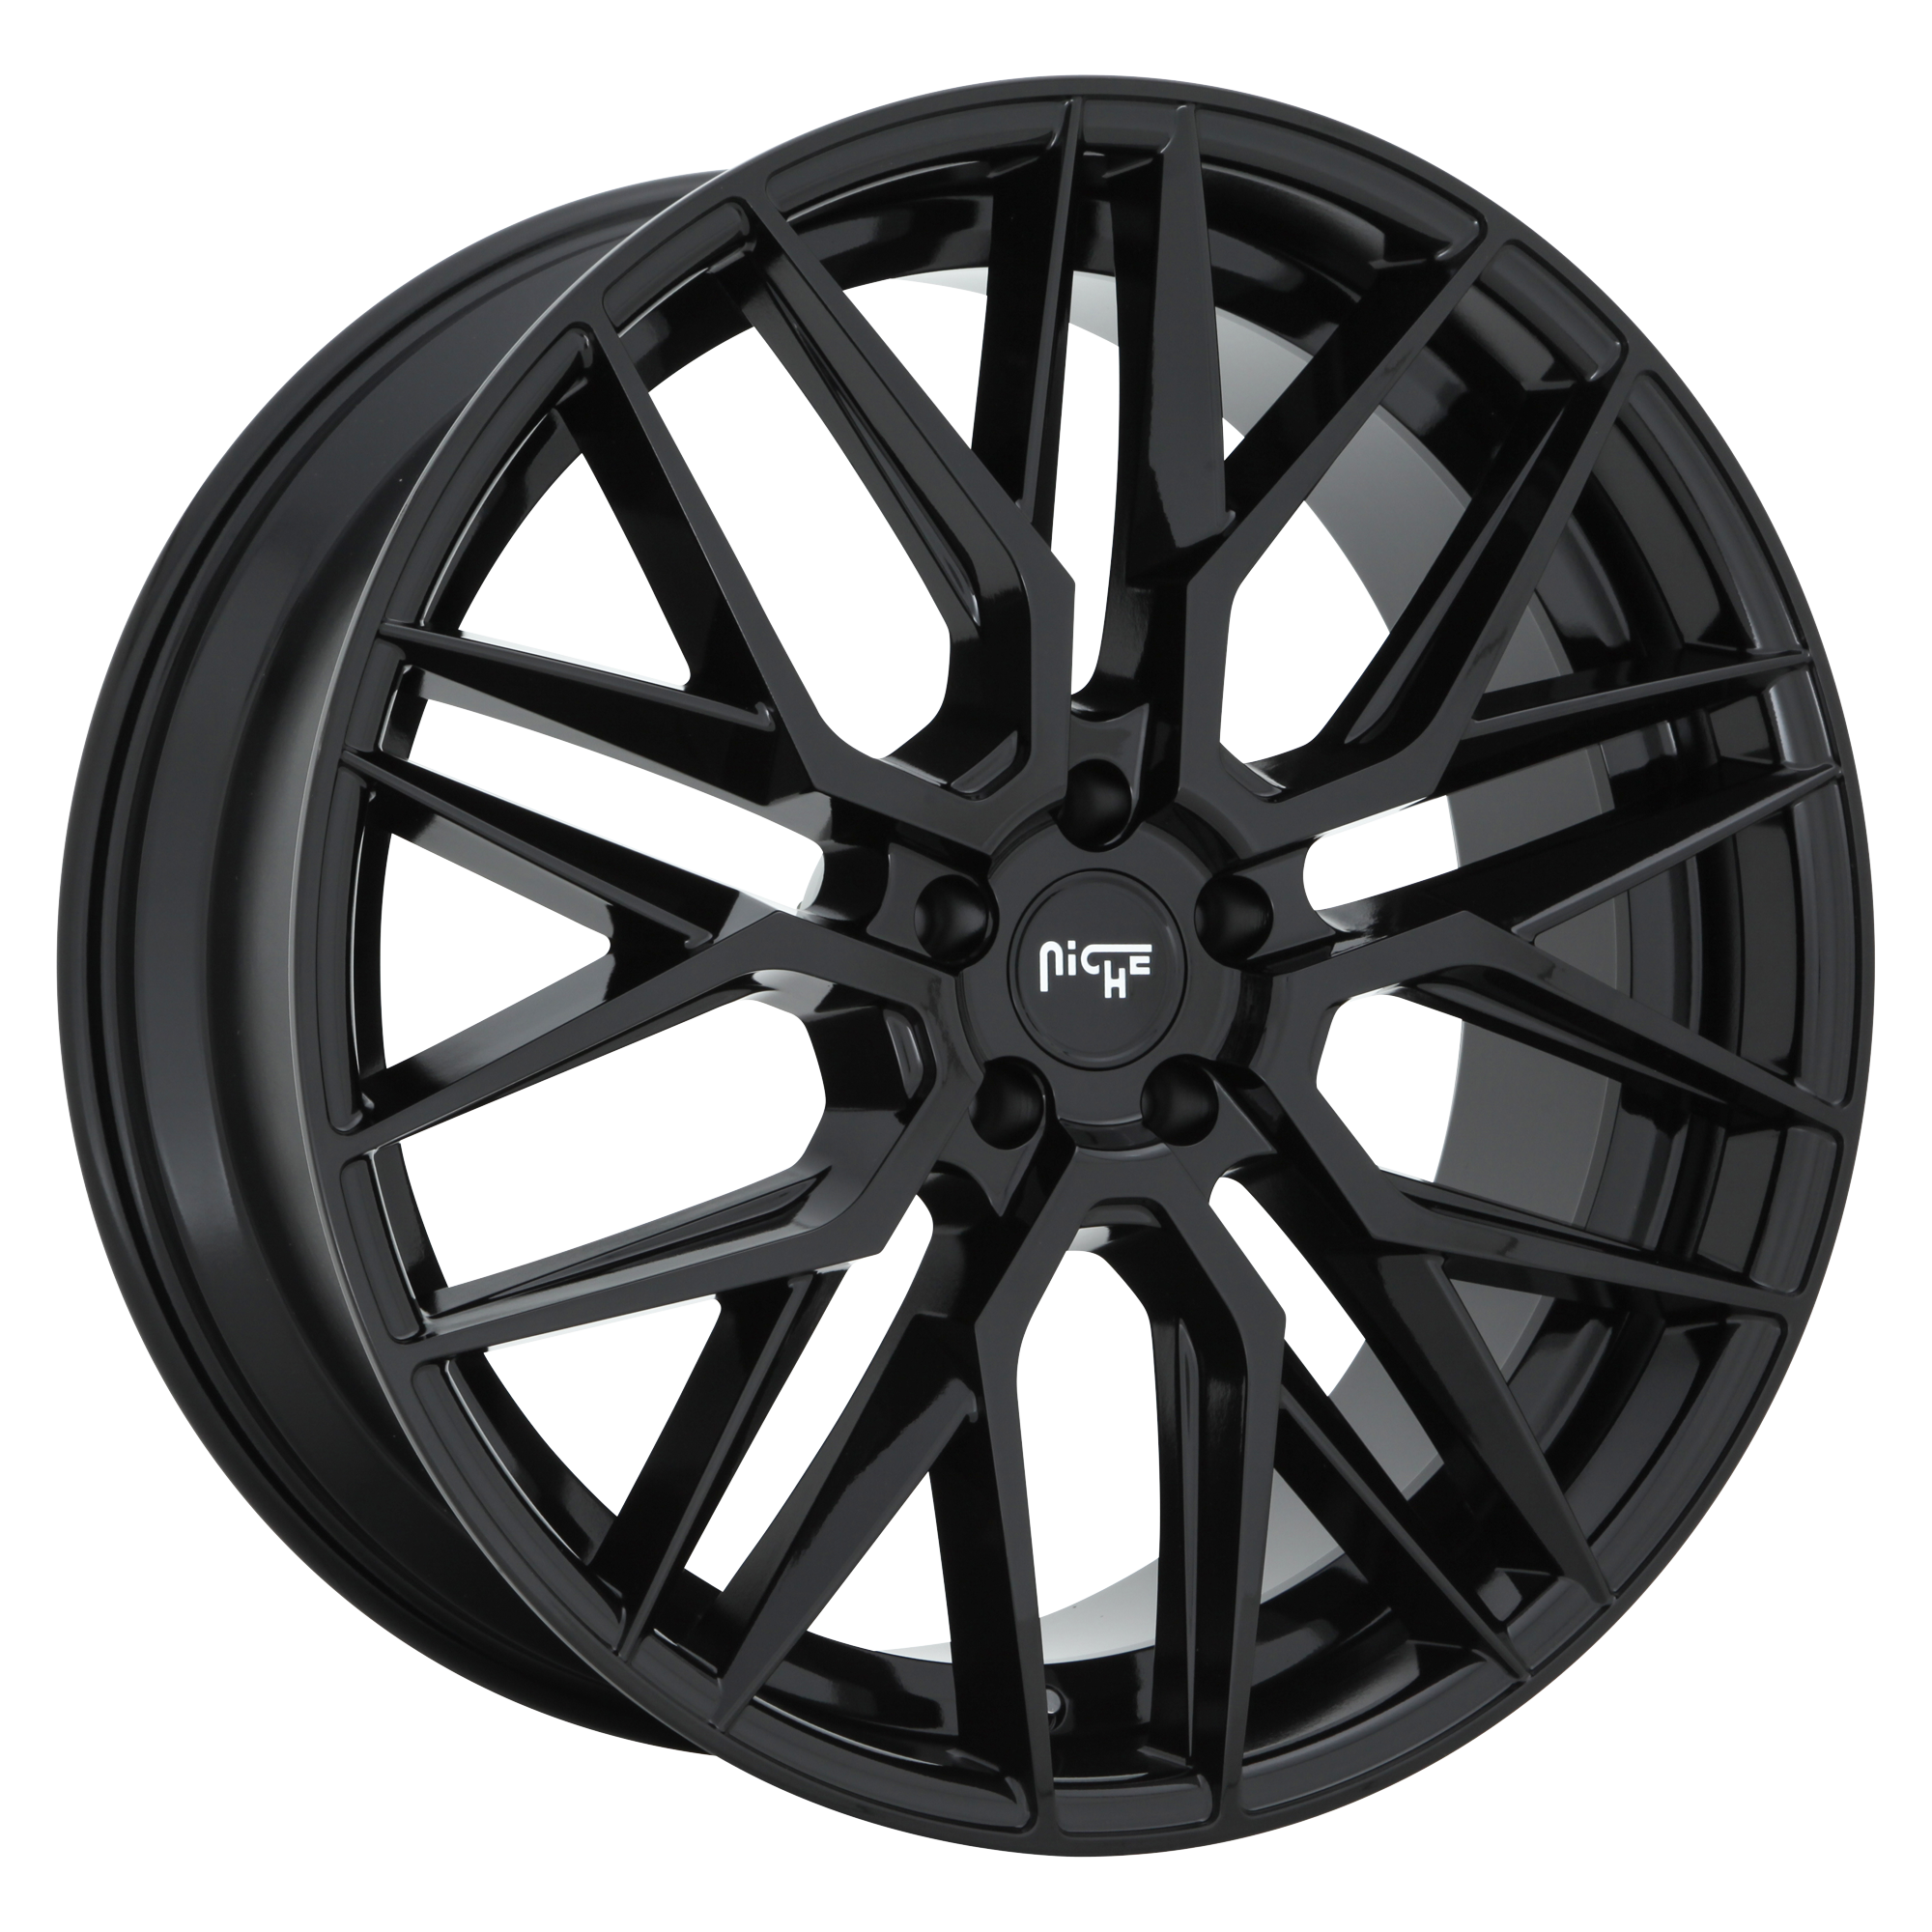 GAMMA 24x10 5x130.00 GLOSS BLACK (35 mm) - Tires and Engine Performance